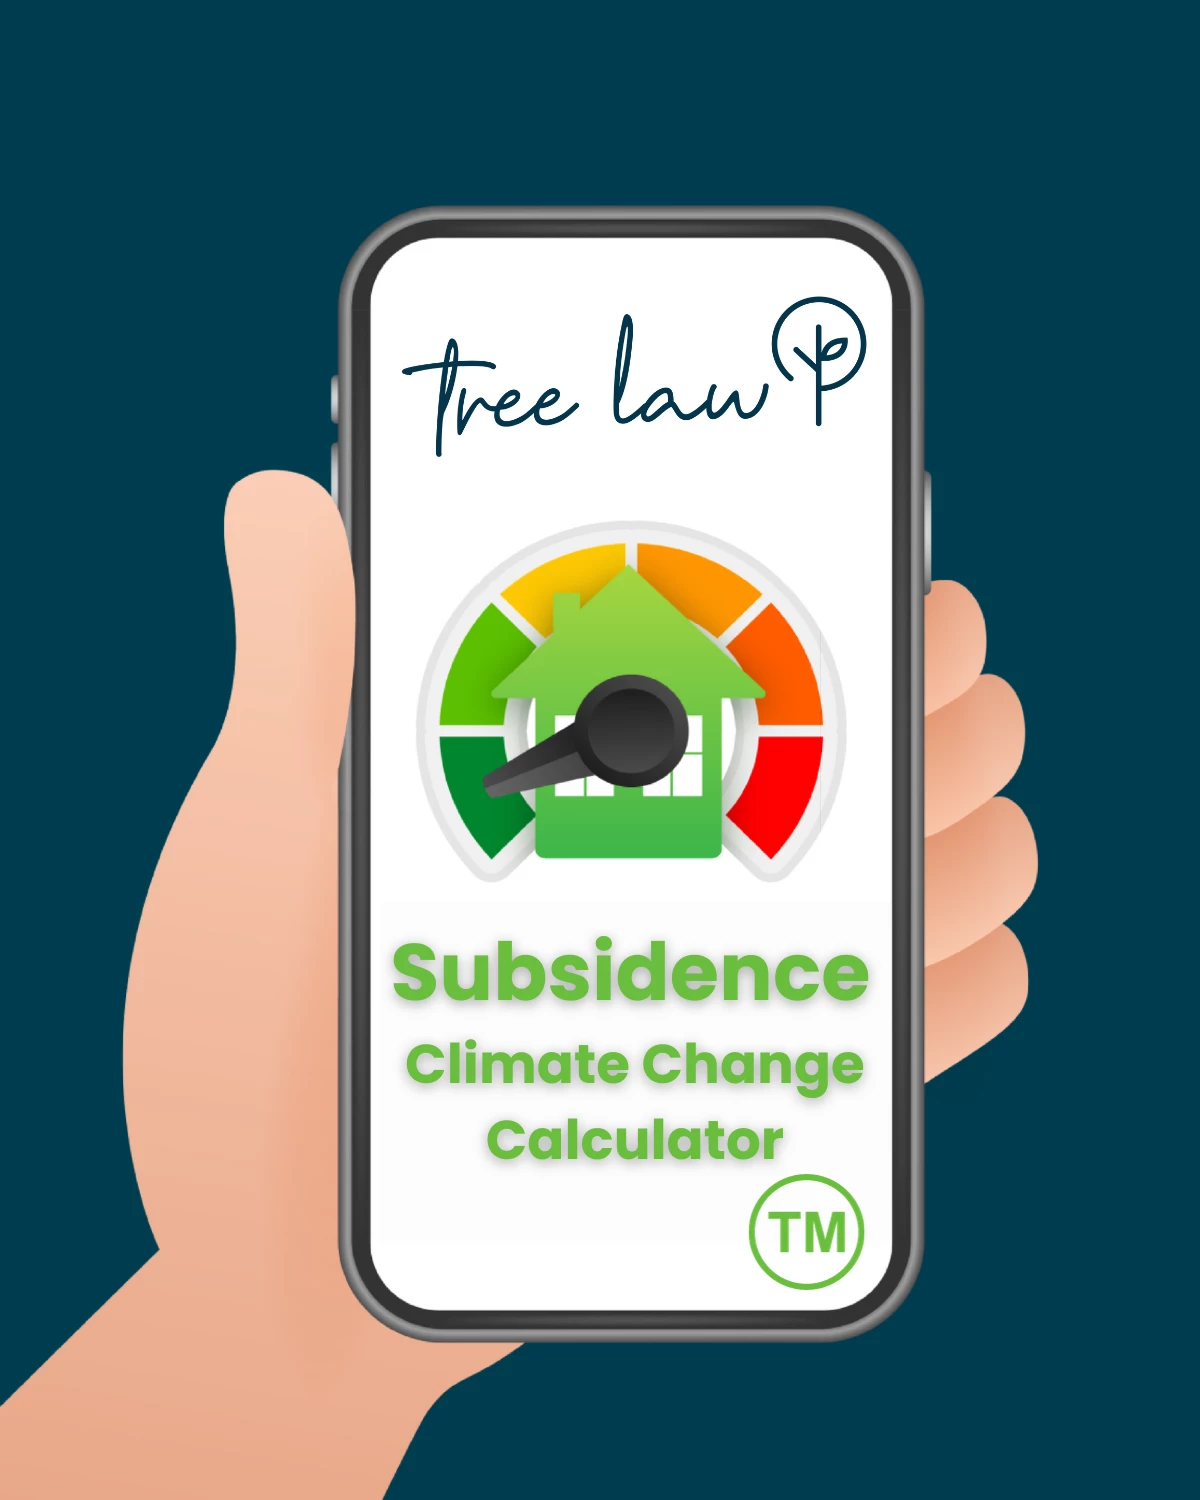 Innovative solution supports insurers with net-zero objectives by measuring emissions relating to tree-based subsidence claims